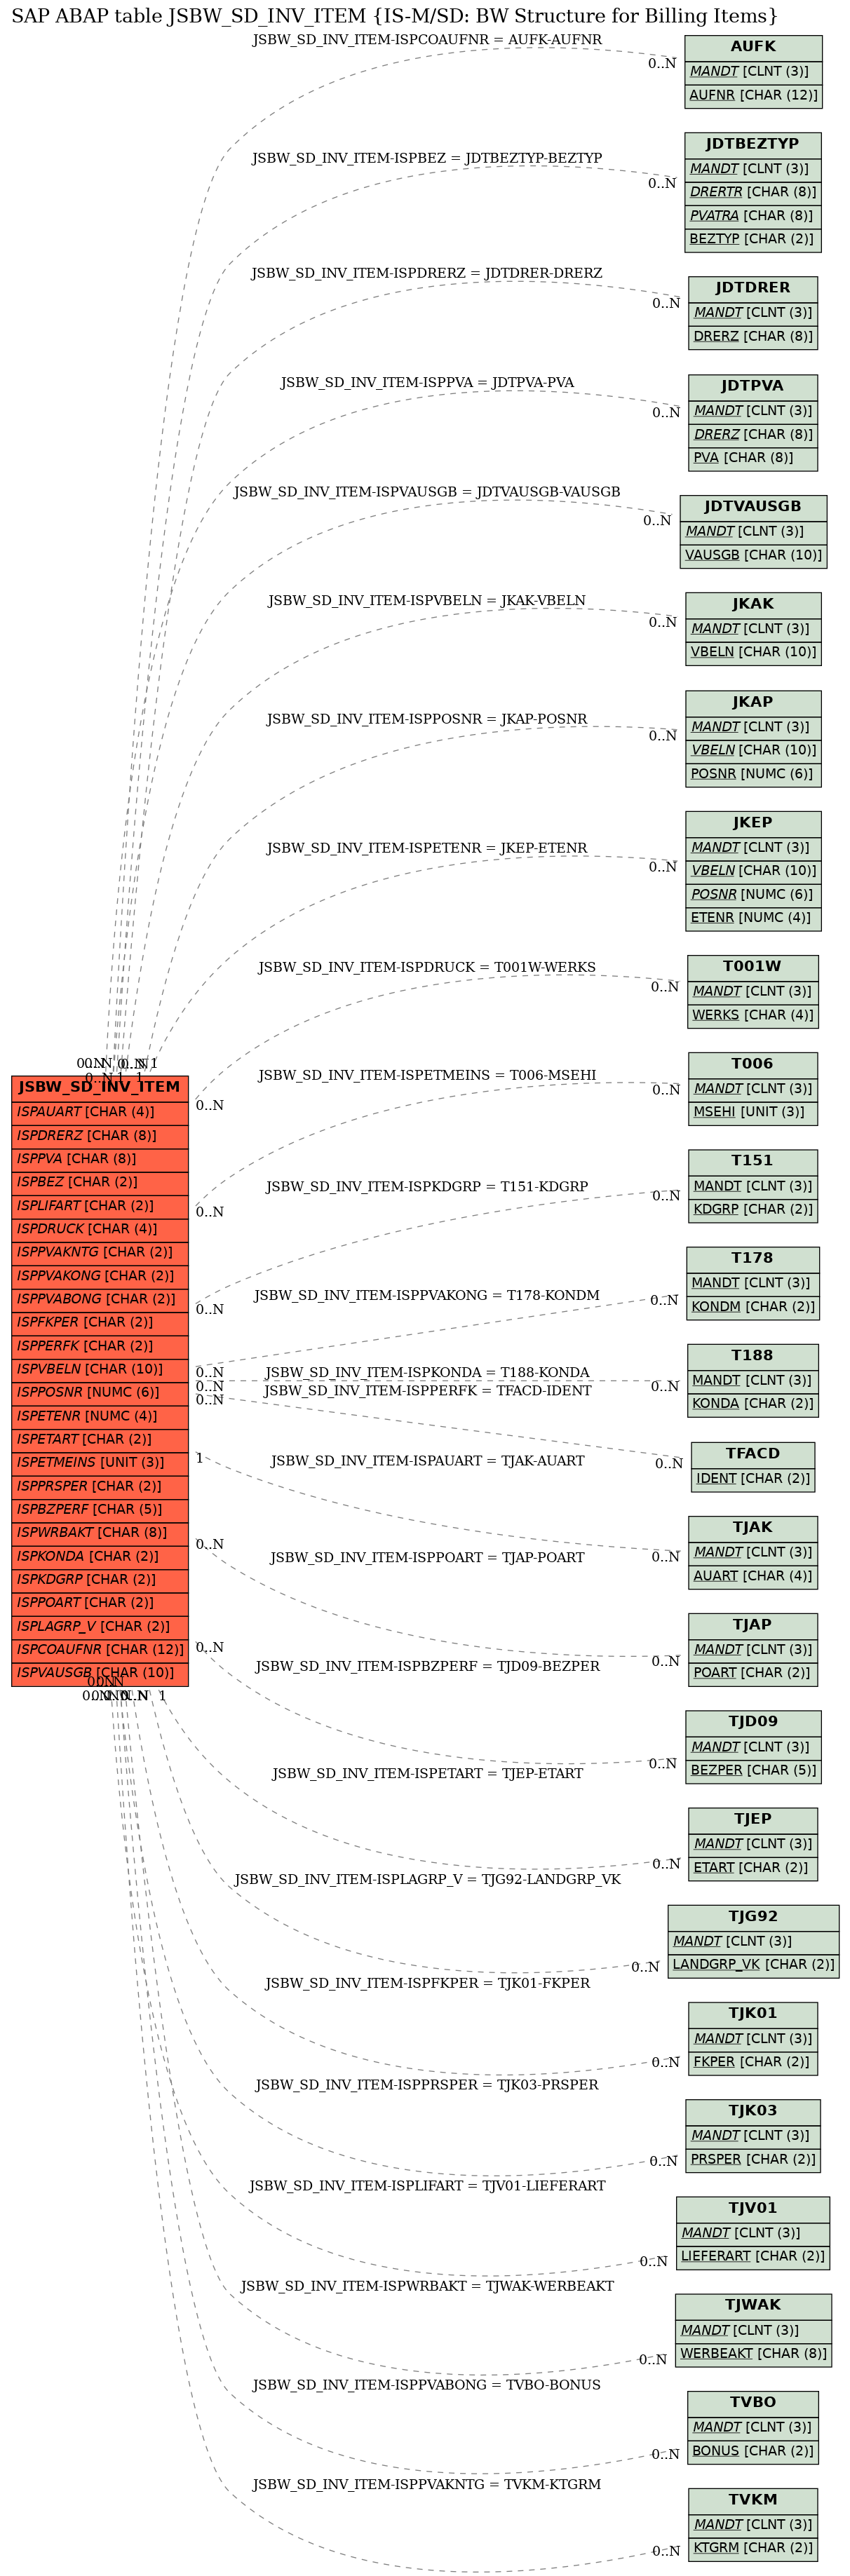 E-R Diagram for table JSBW_SD_INV_ITEM (IS-M/SD: BW Structure for Billing Items)